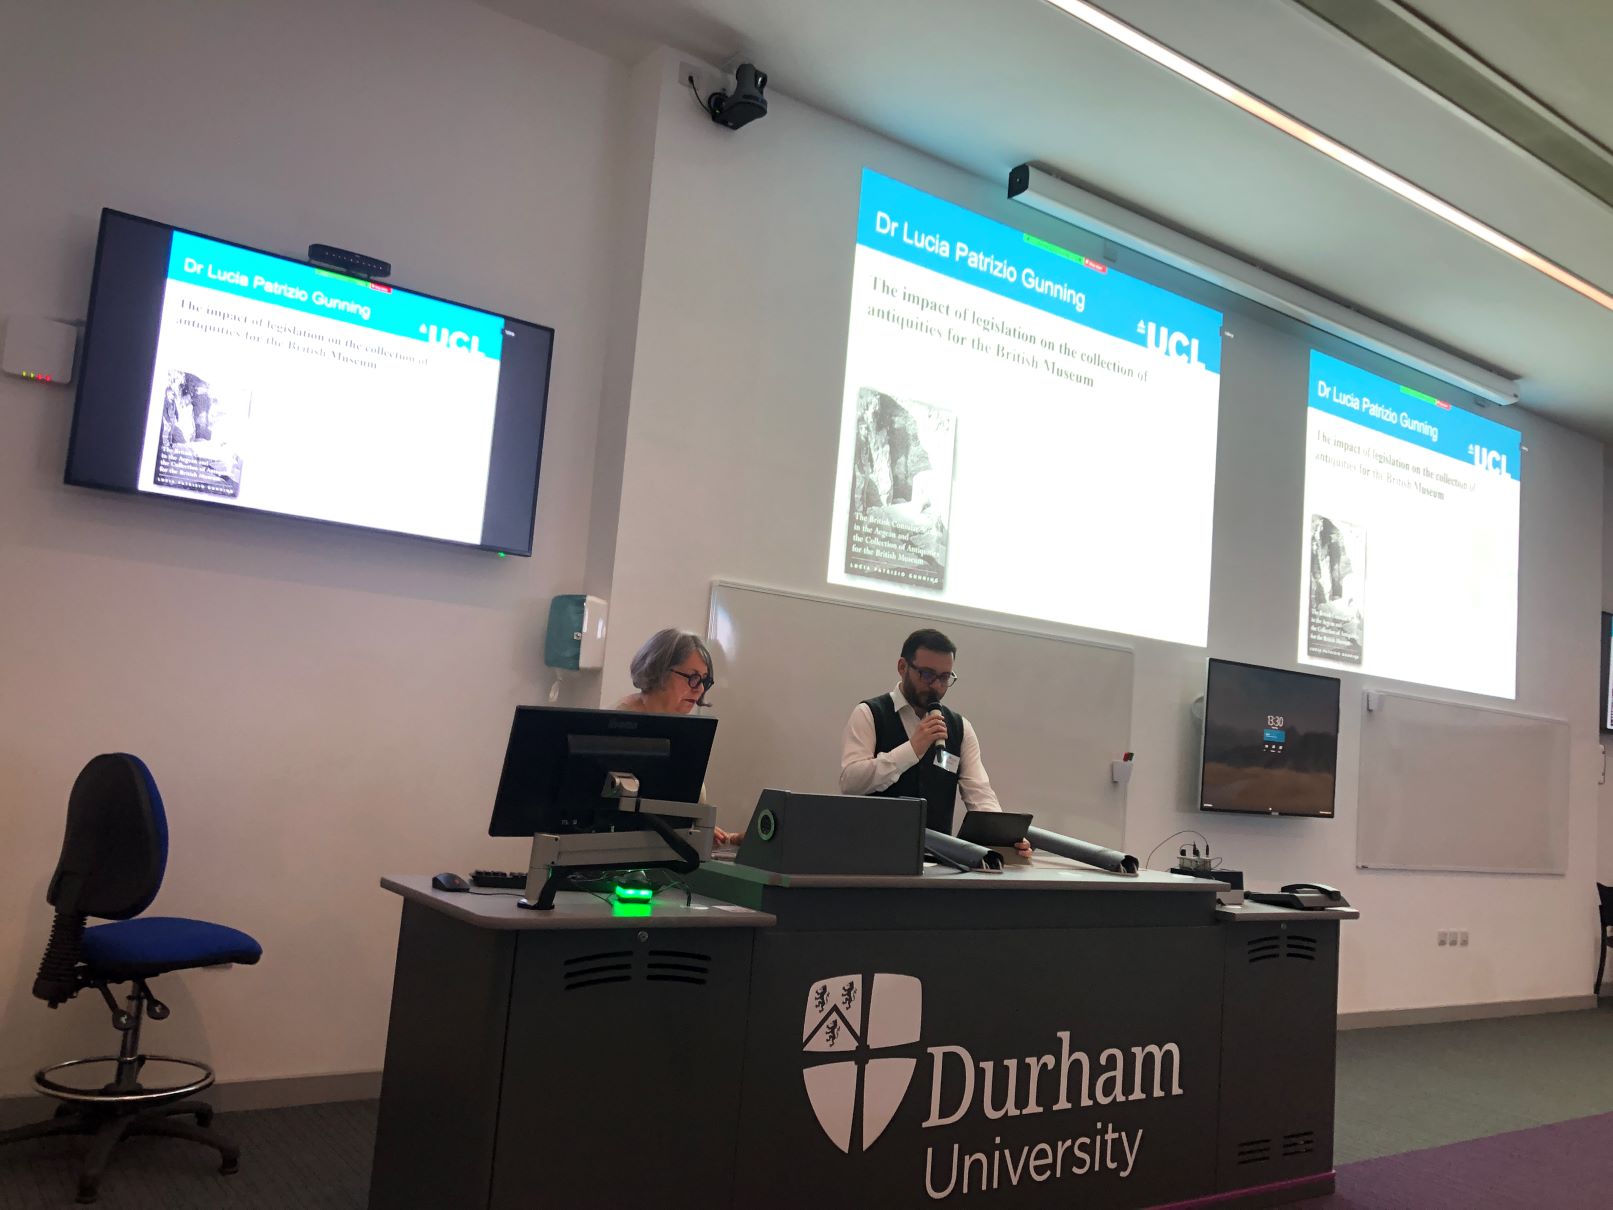 Lucia Patrizio Gunning and Batu Ozdemir stand behind a Durham University lecture podium, presenting to an out-of-frame lecture theatre audience.